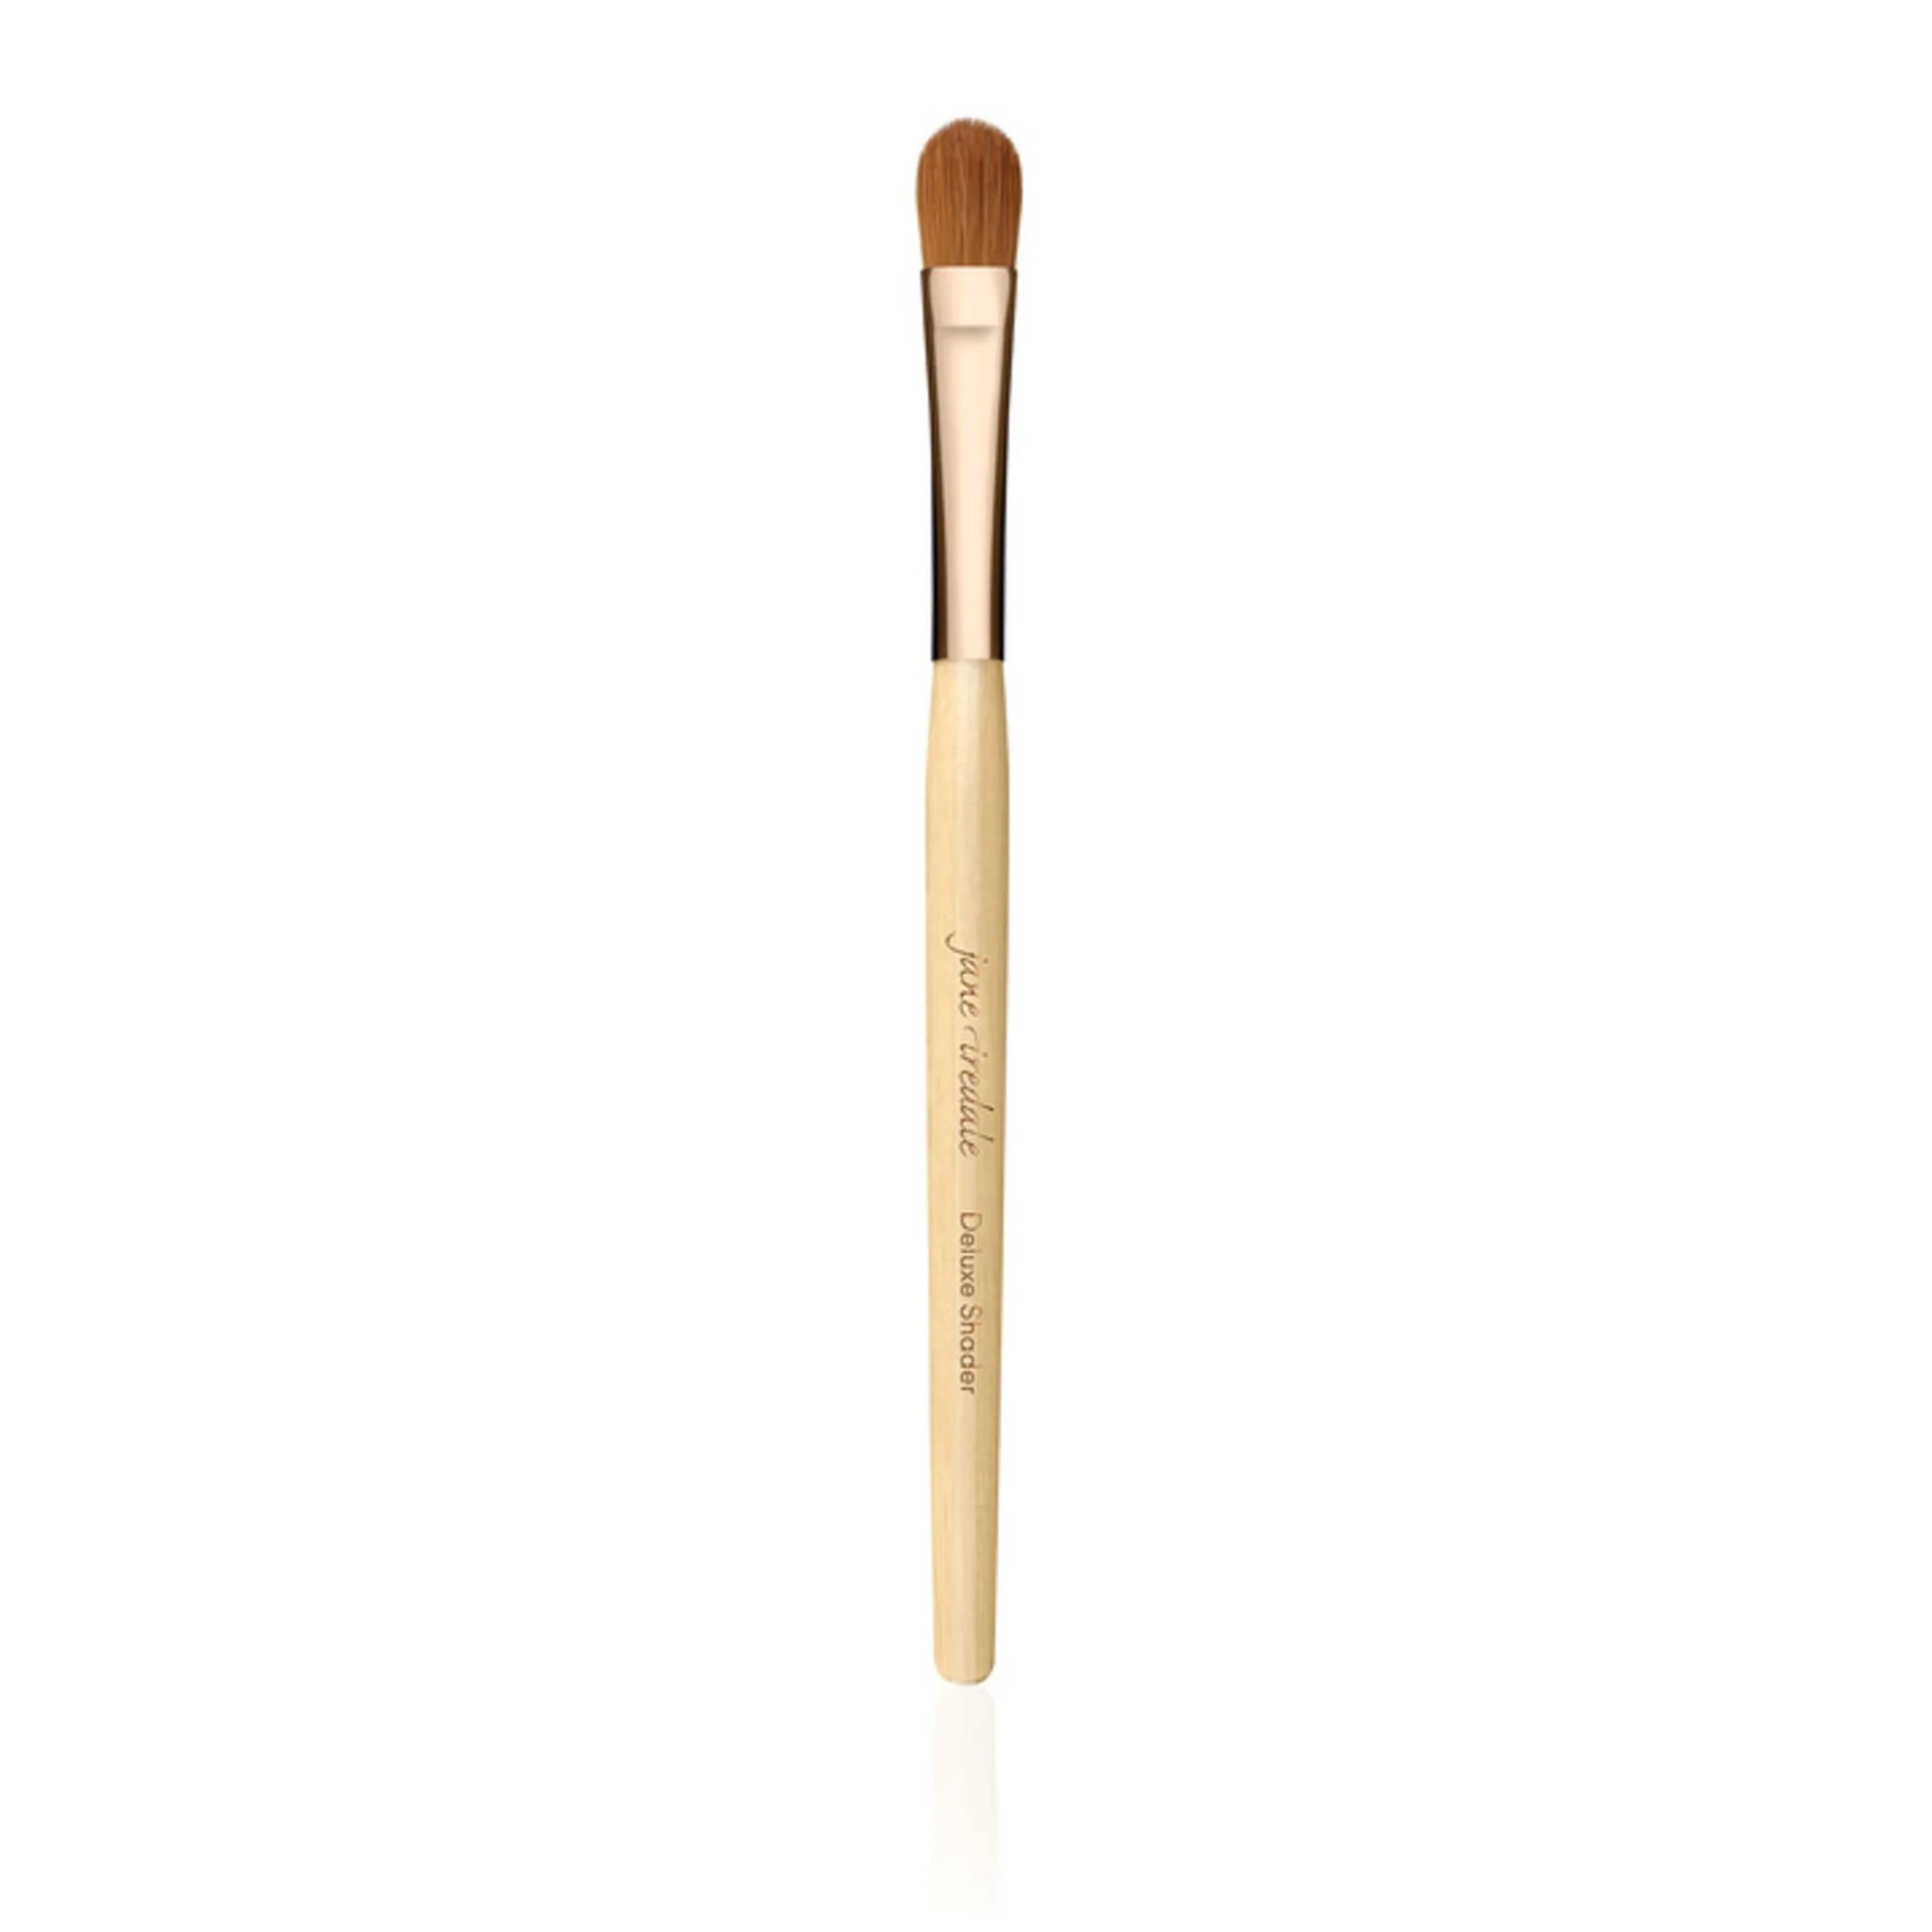 Jane Iredale Deluxe Shader Makeup Brush